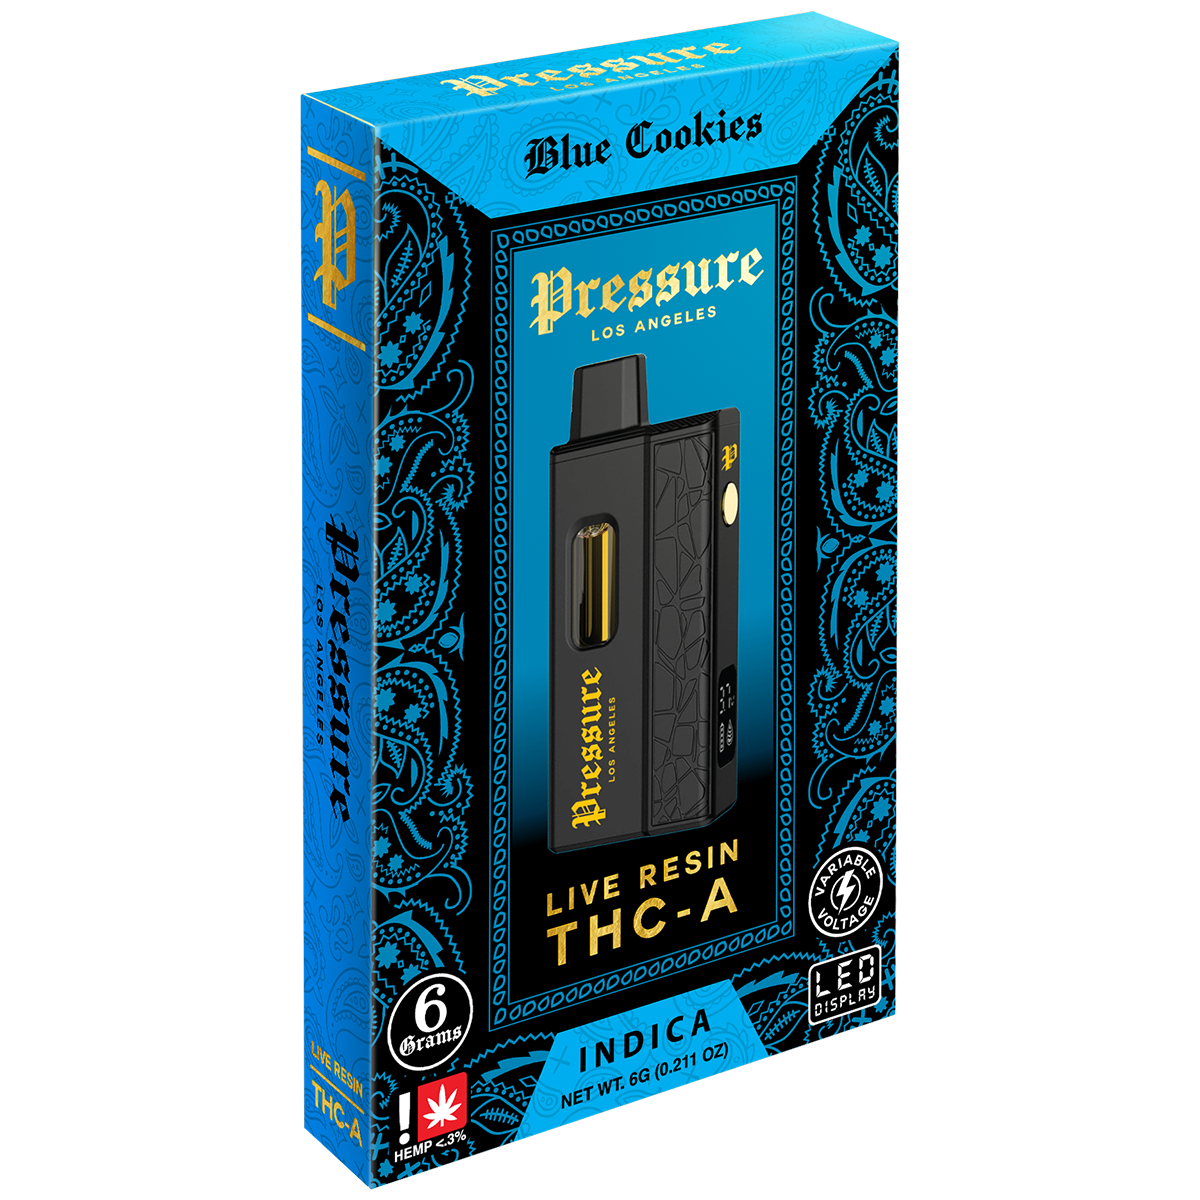 Pressure Live Resin THCA Disposables 6g Best Price